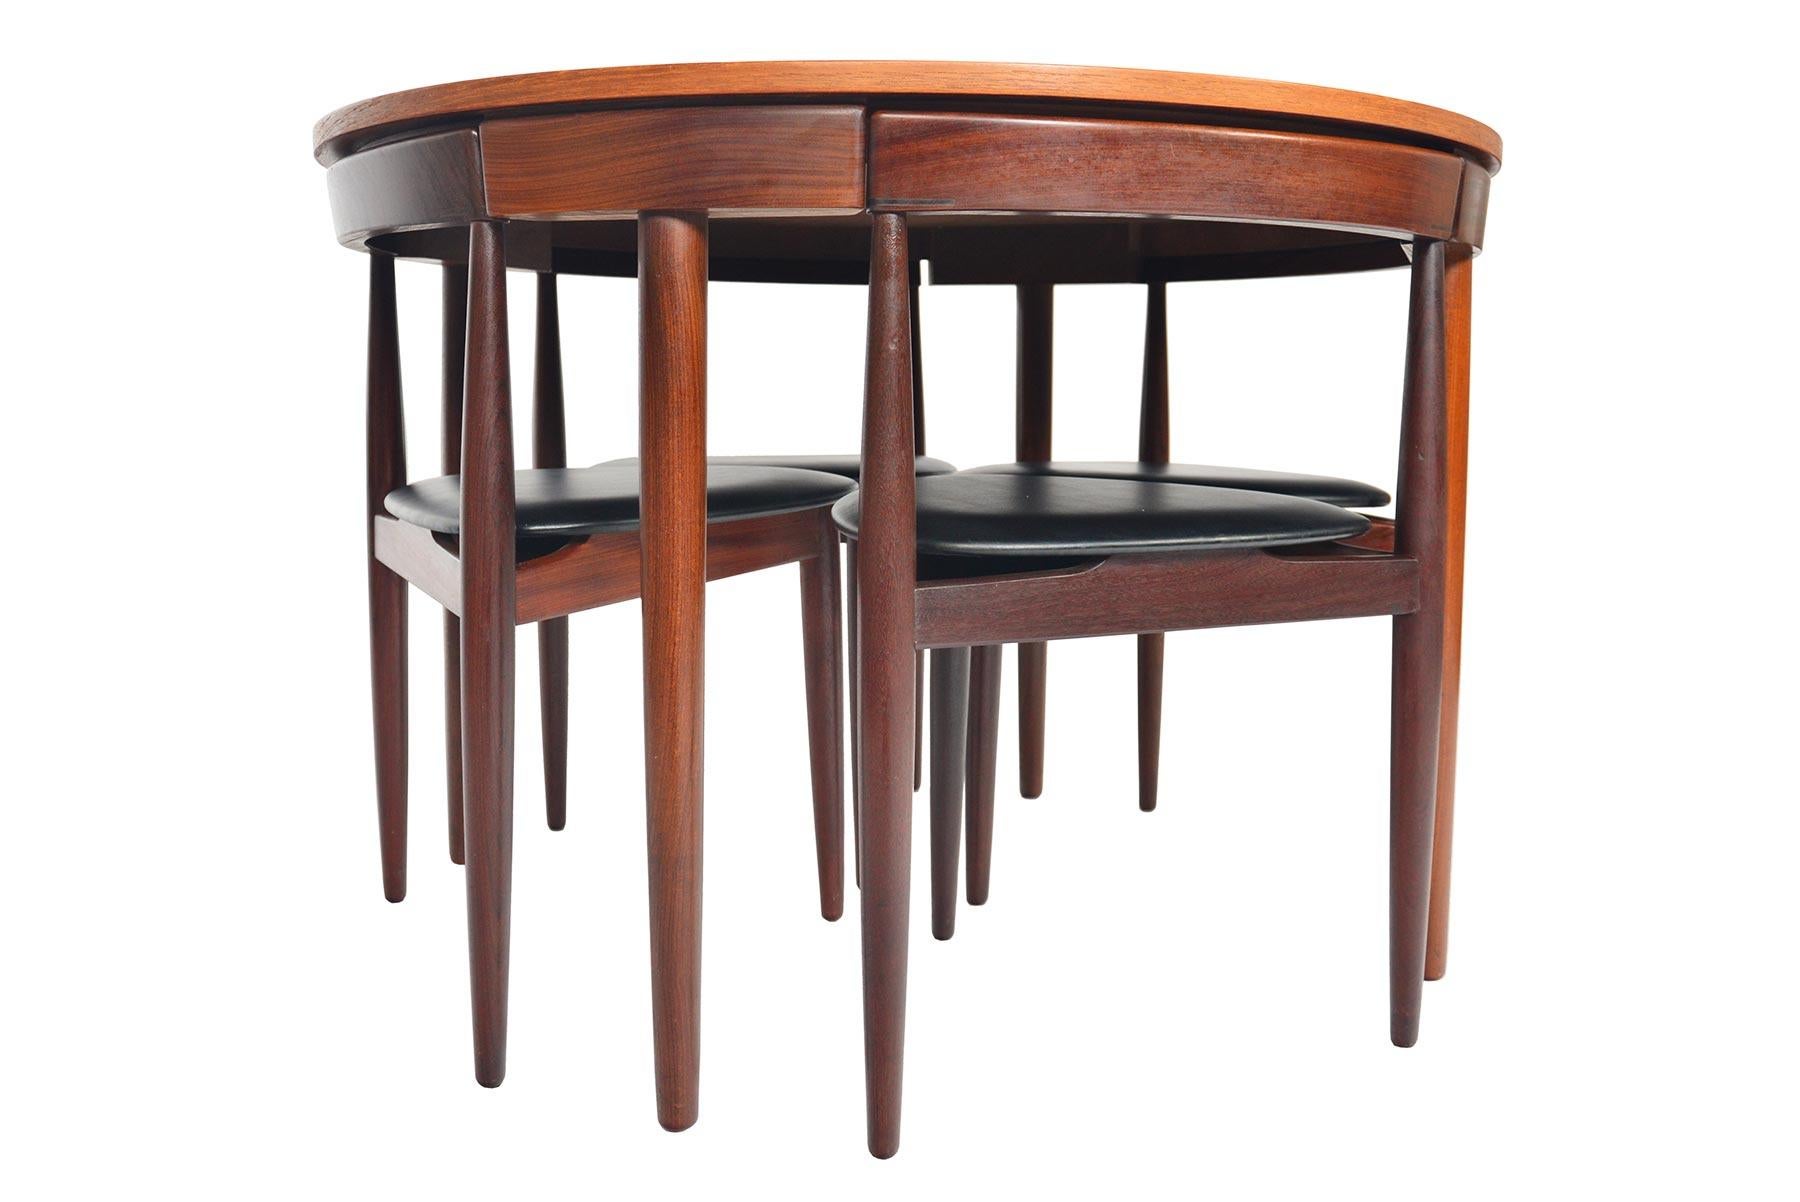 roundette table